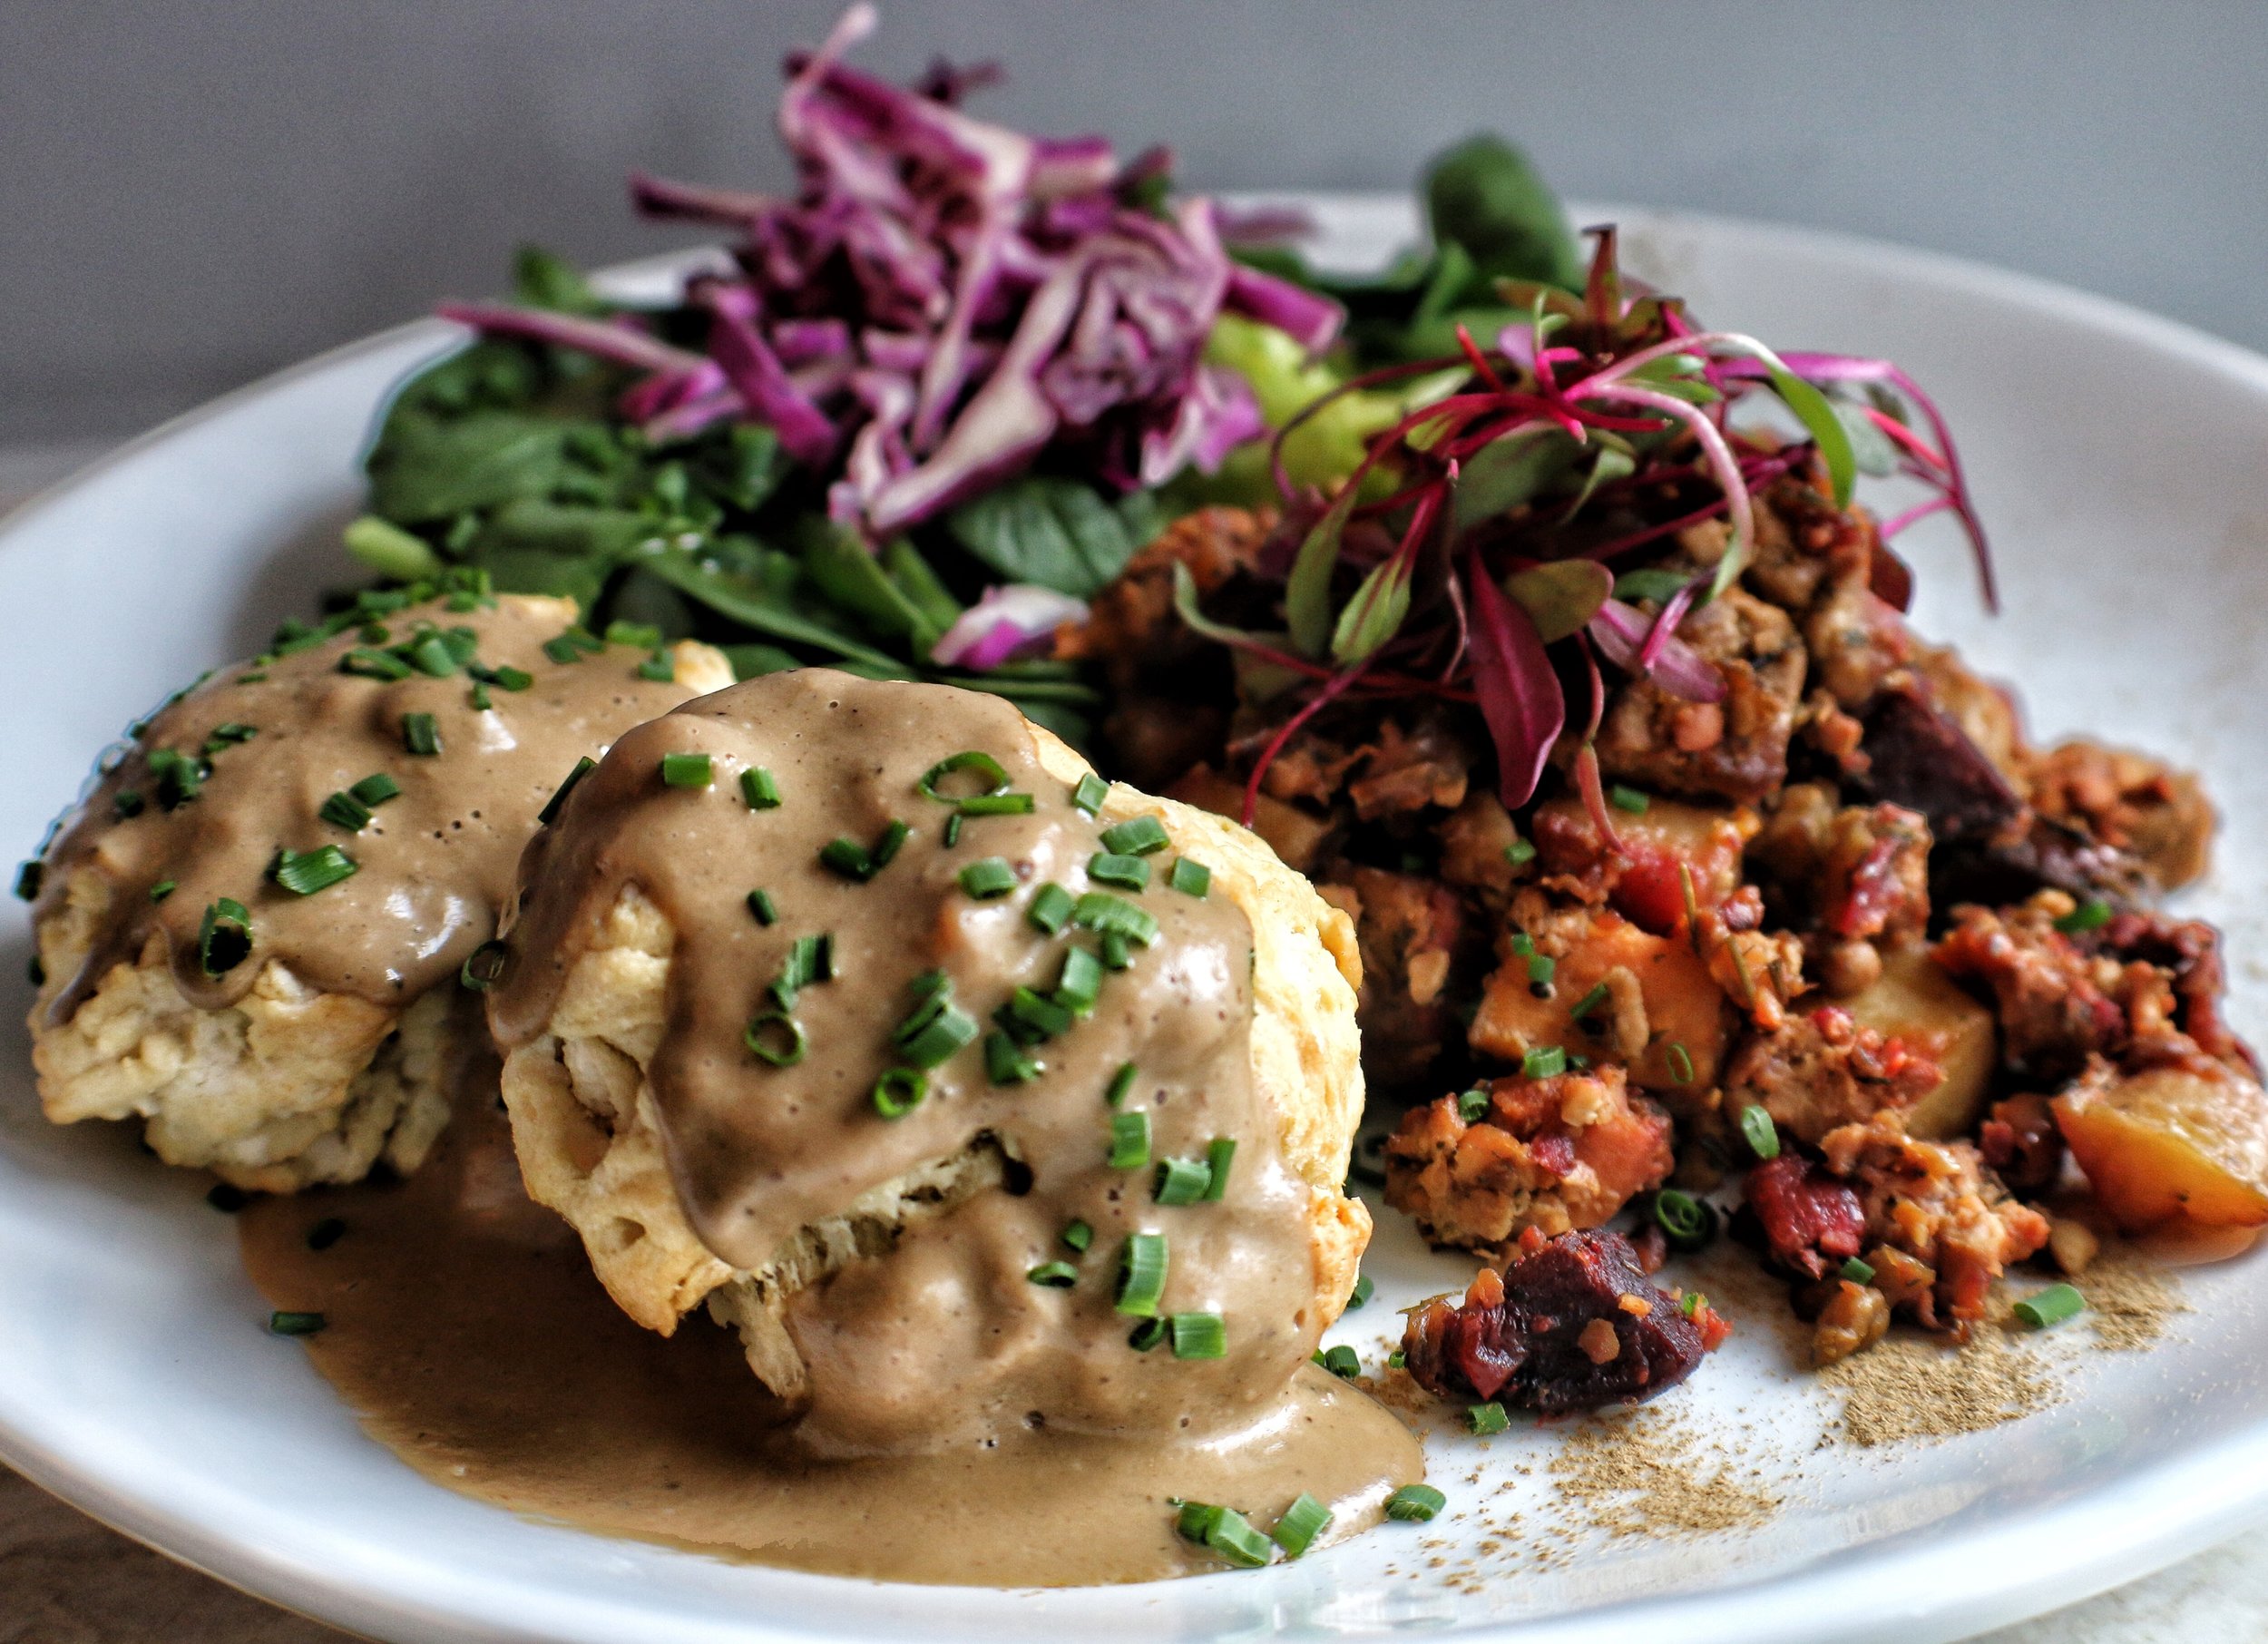  Biscuits &amp; Gravyporcini gravy, olive oil biscuits, red flannel tempeh, hash, baby greens salad 